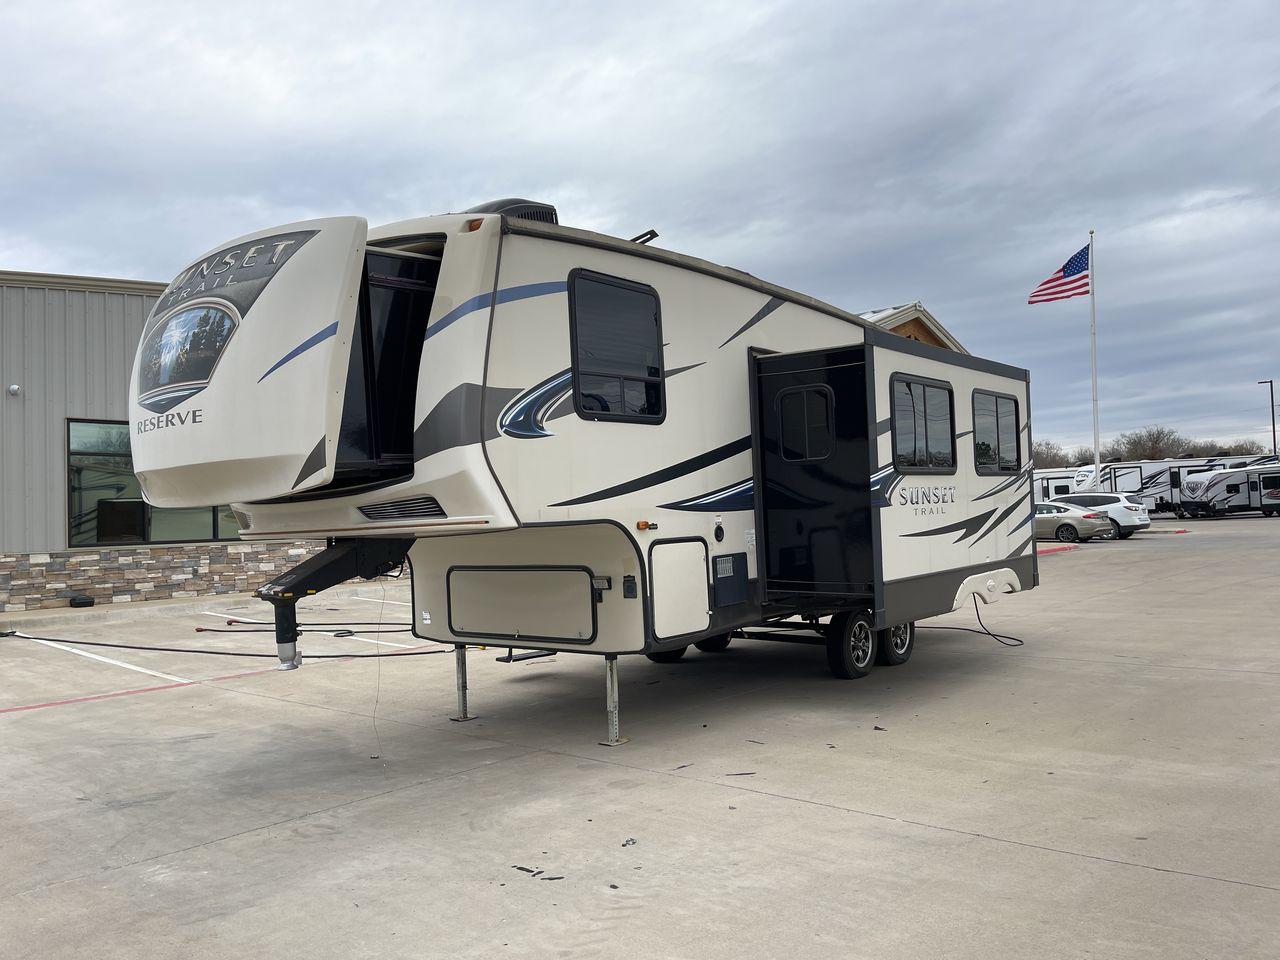 2015 CROSSROADS SUNSET TRAIL RESERVE (4V0FC2624FB) , Length: 30.17 ft | Dry Weight: 6,401 lbs | Gross Weight: 9,542 lbs | Slides: 2 transmission, located at 4319 N Main Street, Cleburne, TX, 76033, (817) 221-0660, 32.435829, -97.384178 - This model has the right mix of space and maneuverability, with a length of 30 feet and a dry weight of 6,401 pounds. With a strong aluminum frame and fiberglass sidewalls, it will last for a long time on the road, making it a great choice for travelers who want both style and dependability. The Sun - Photo #24